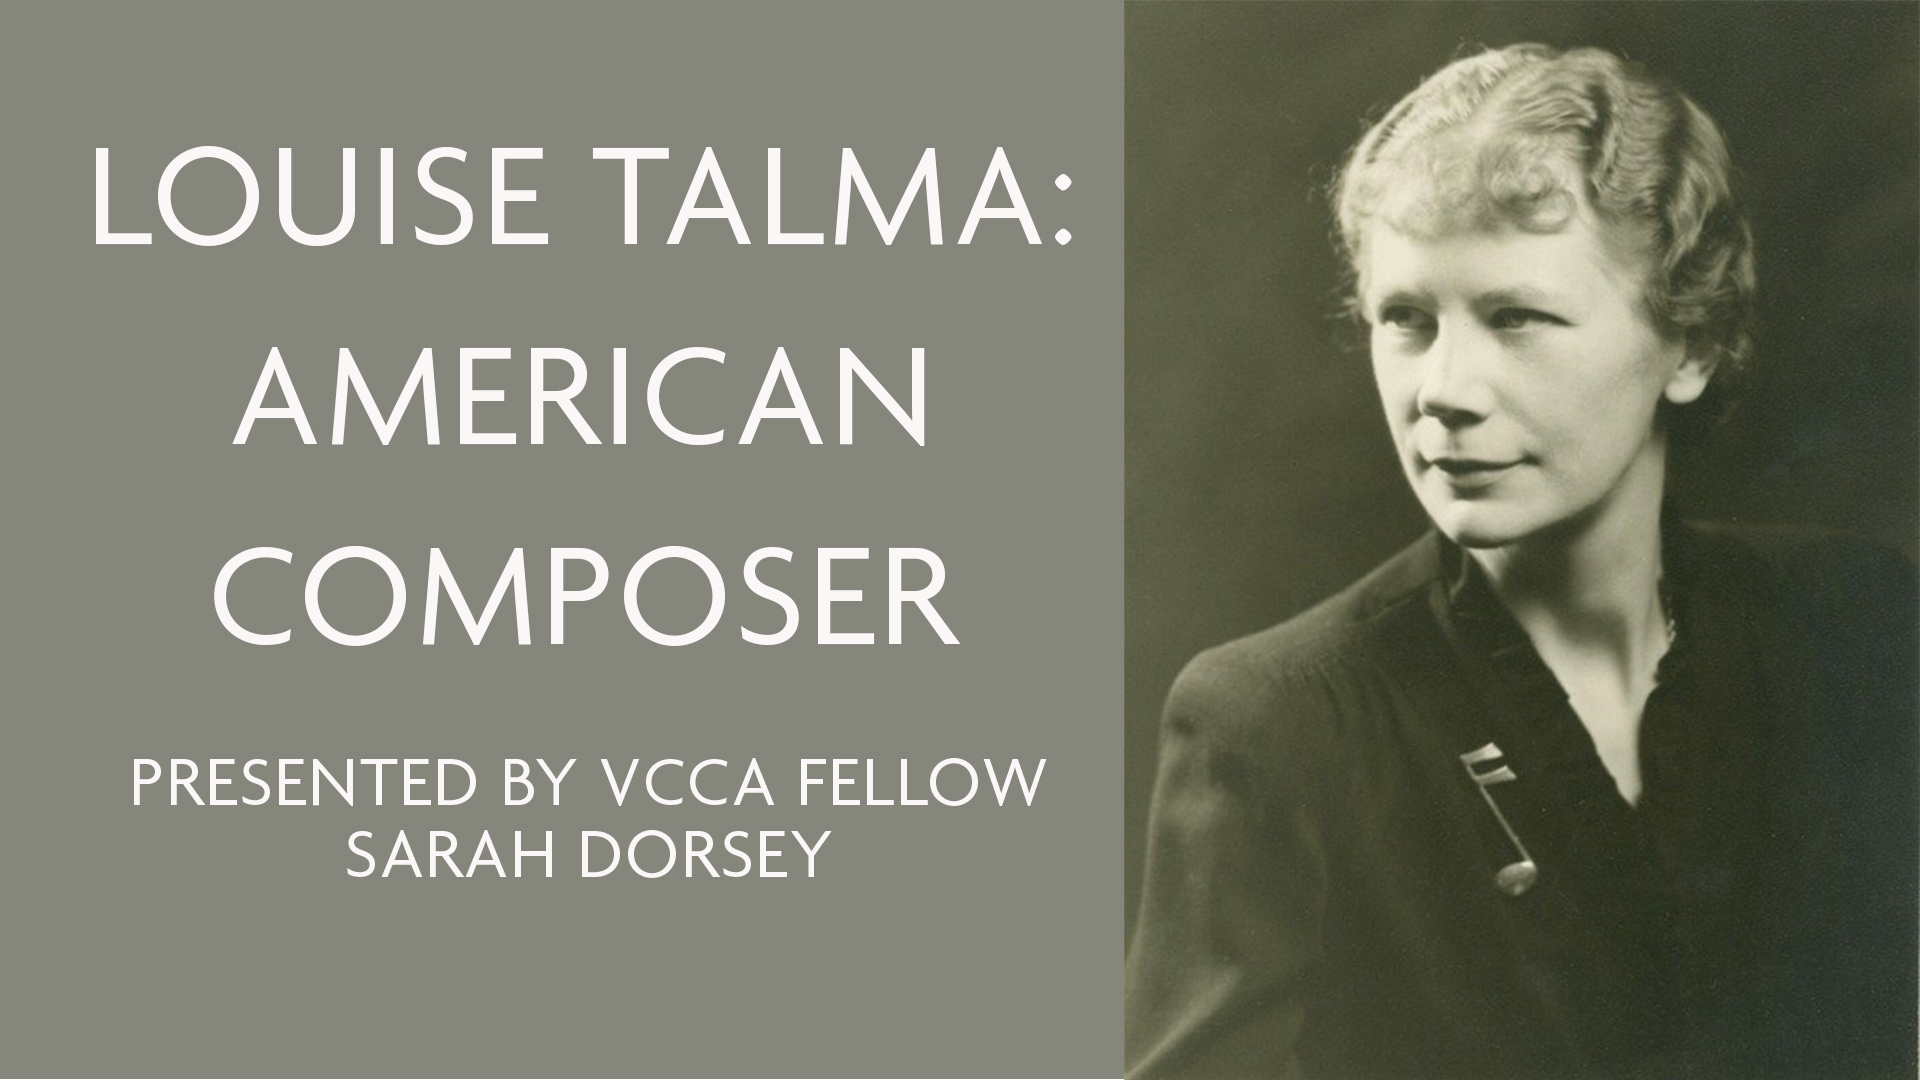 Honored and excited to present on Louise Talma and VCCA at Riverviews Artspace in Lynchburg, VA May 30, 7:30. – "To be a biographer…"